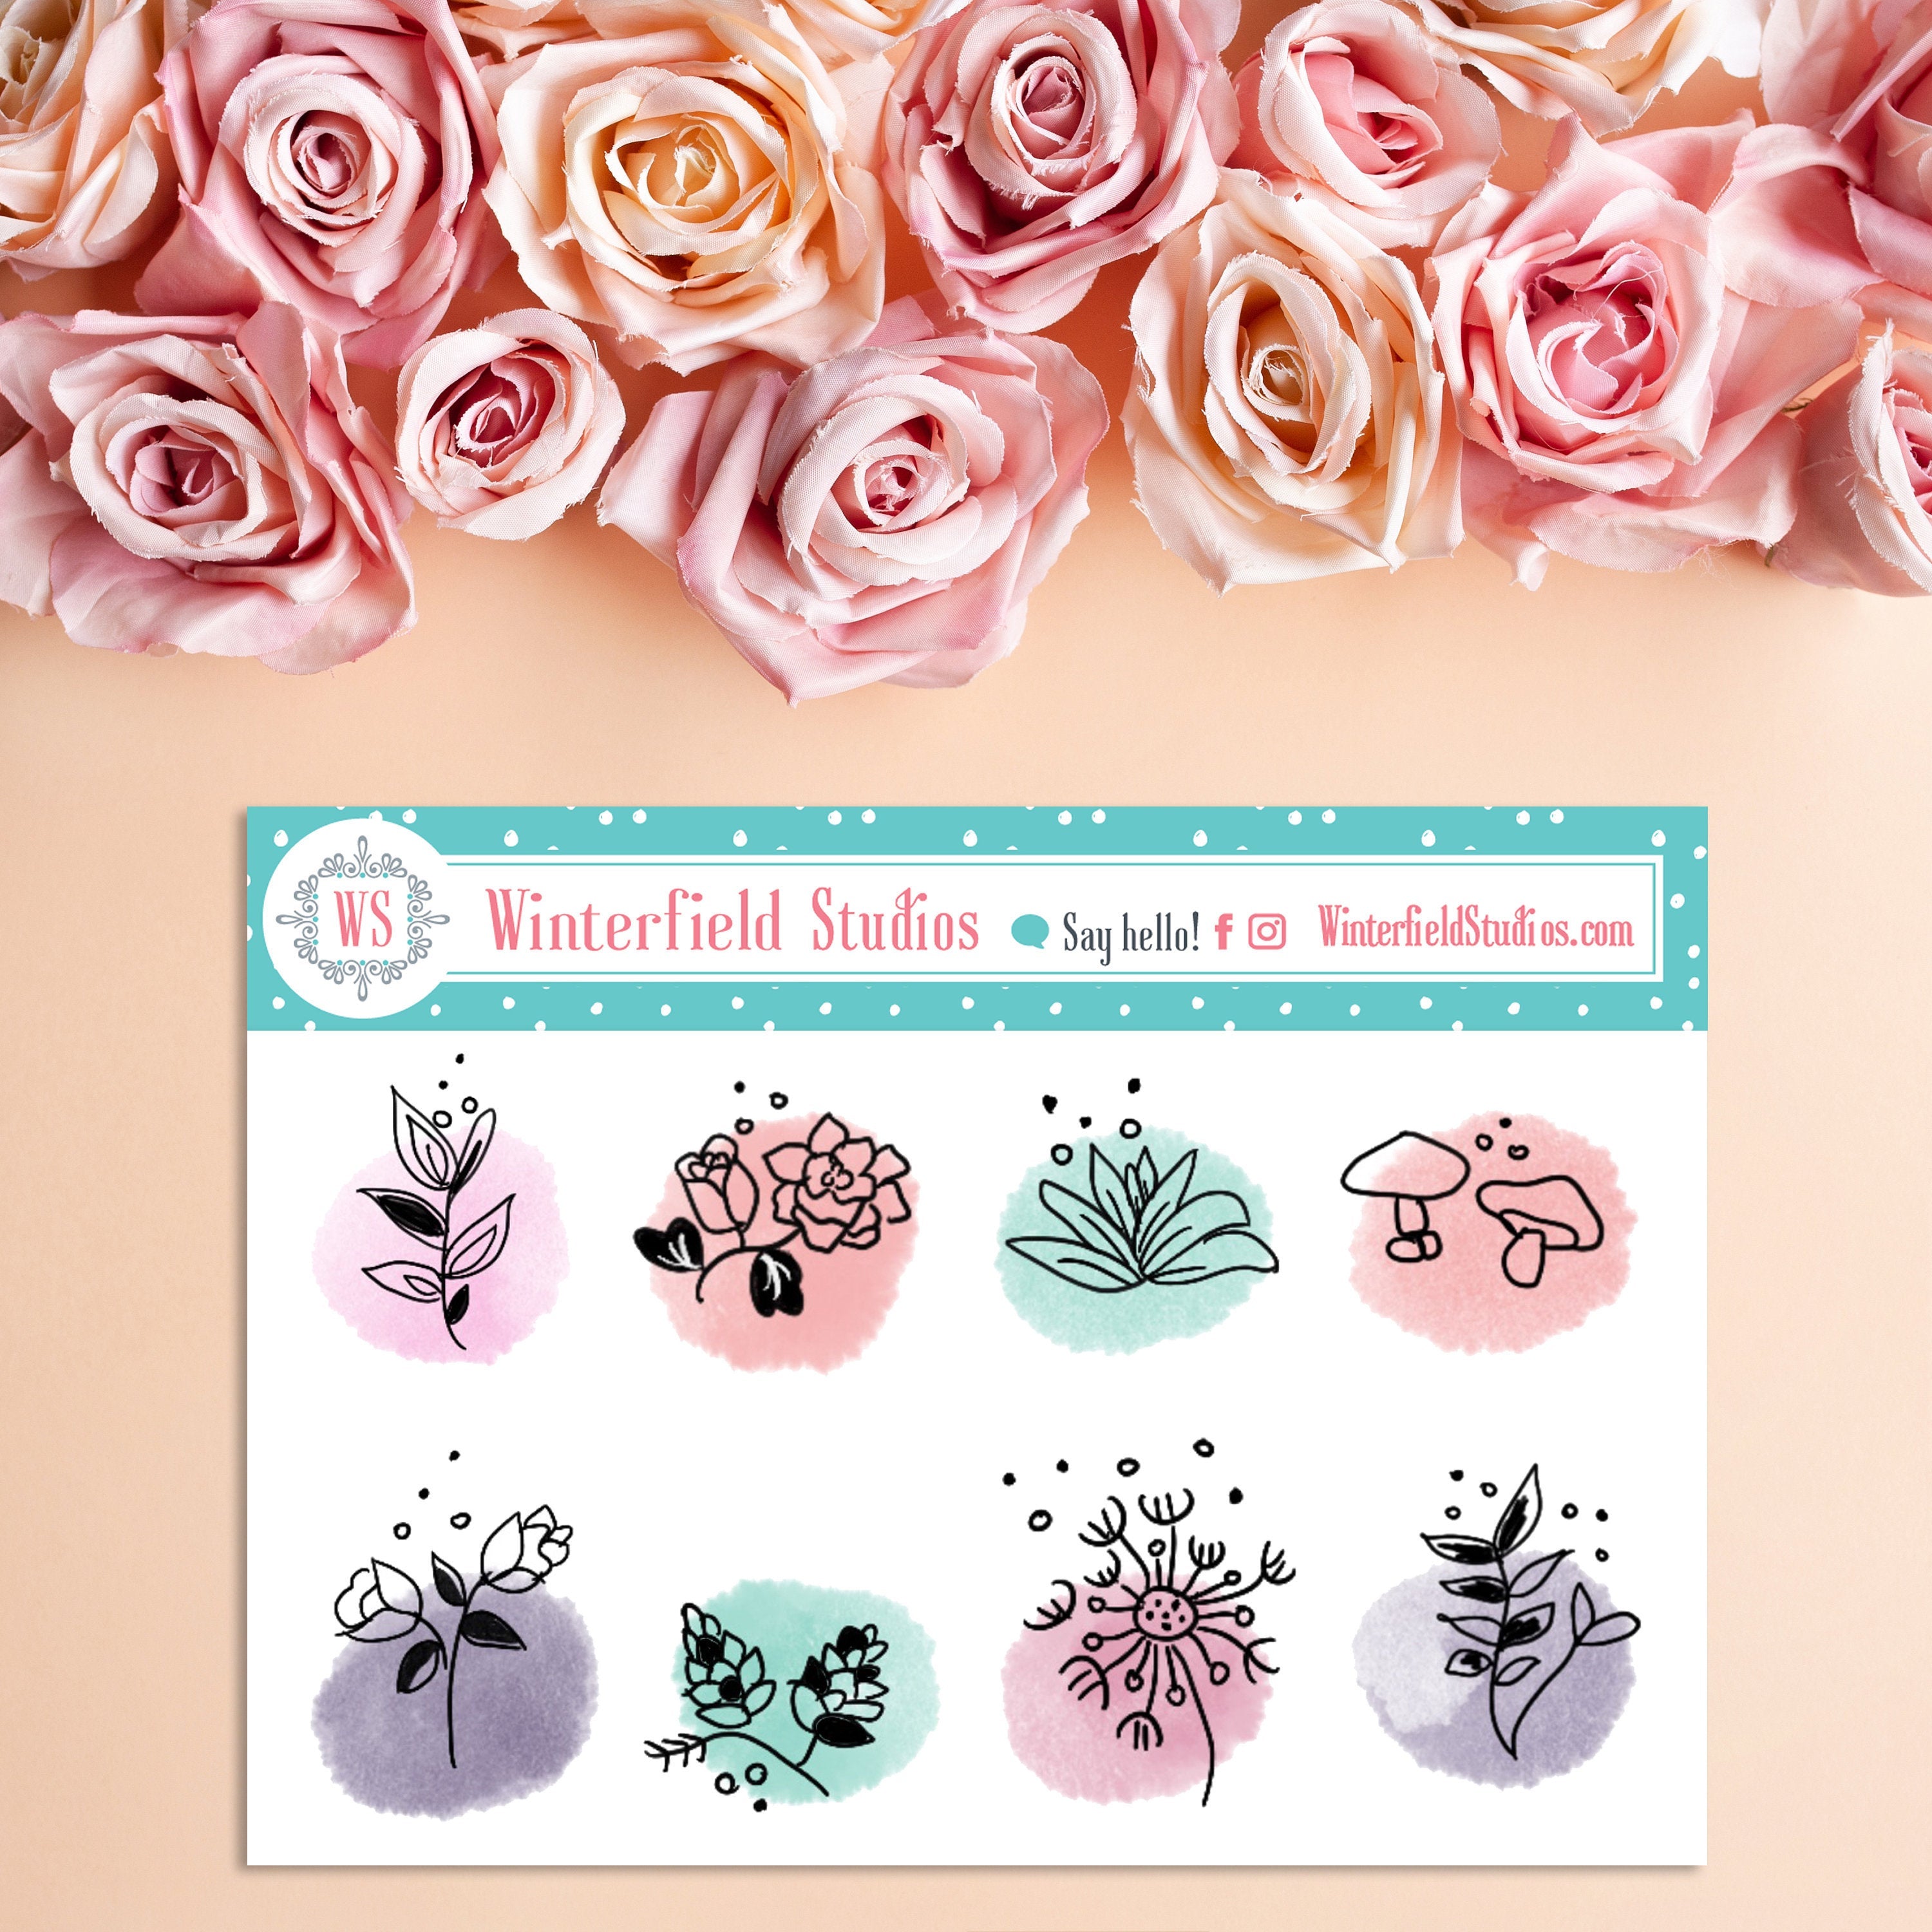 Spring Floral Planner Stickers | Flower Stickers Floral Stickers Plant  Stickers Bullet Journal Stickers Bujo Stickers